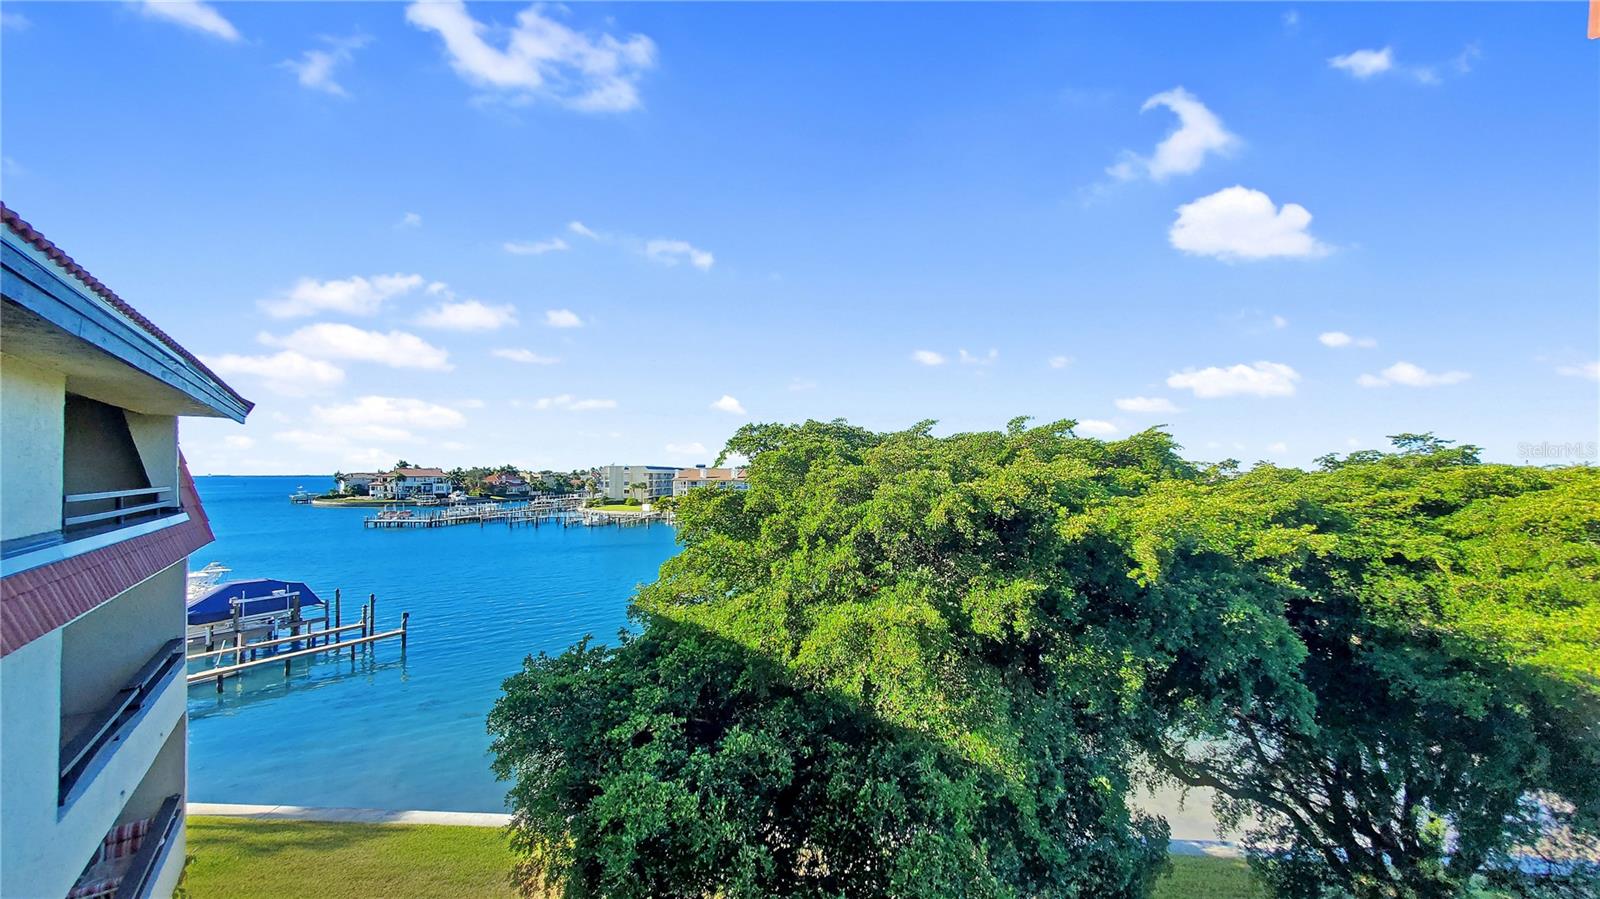 Beautiful Views From your balcony 106 1ST ST E, #311, TIERRA VERDE, FL 33715